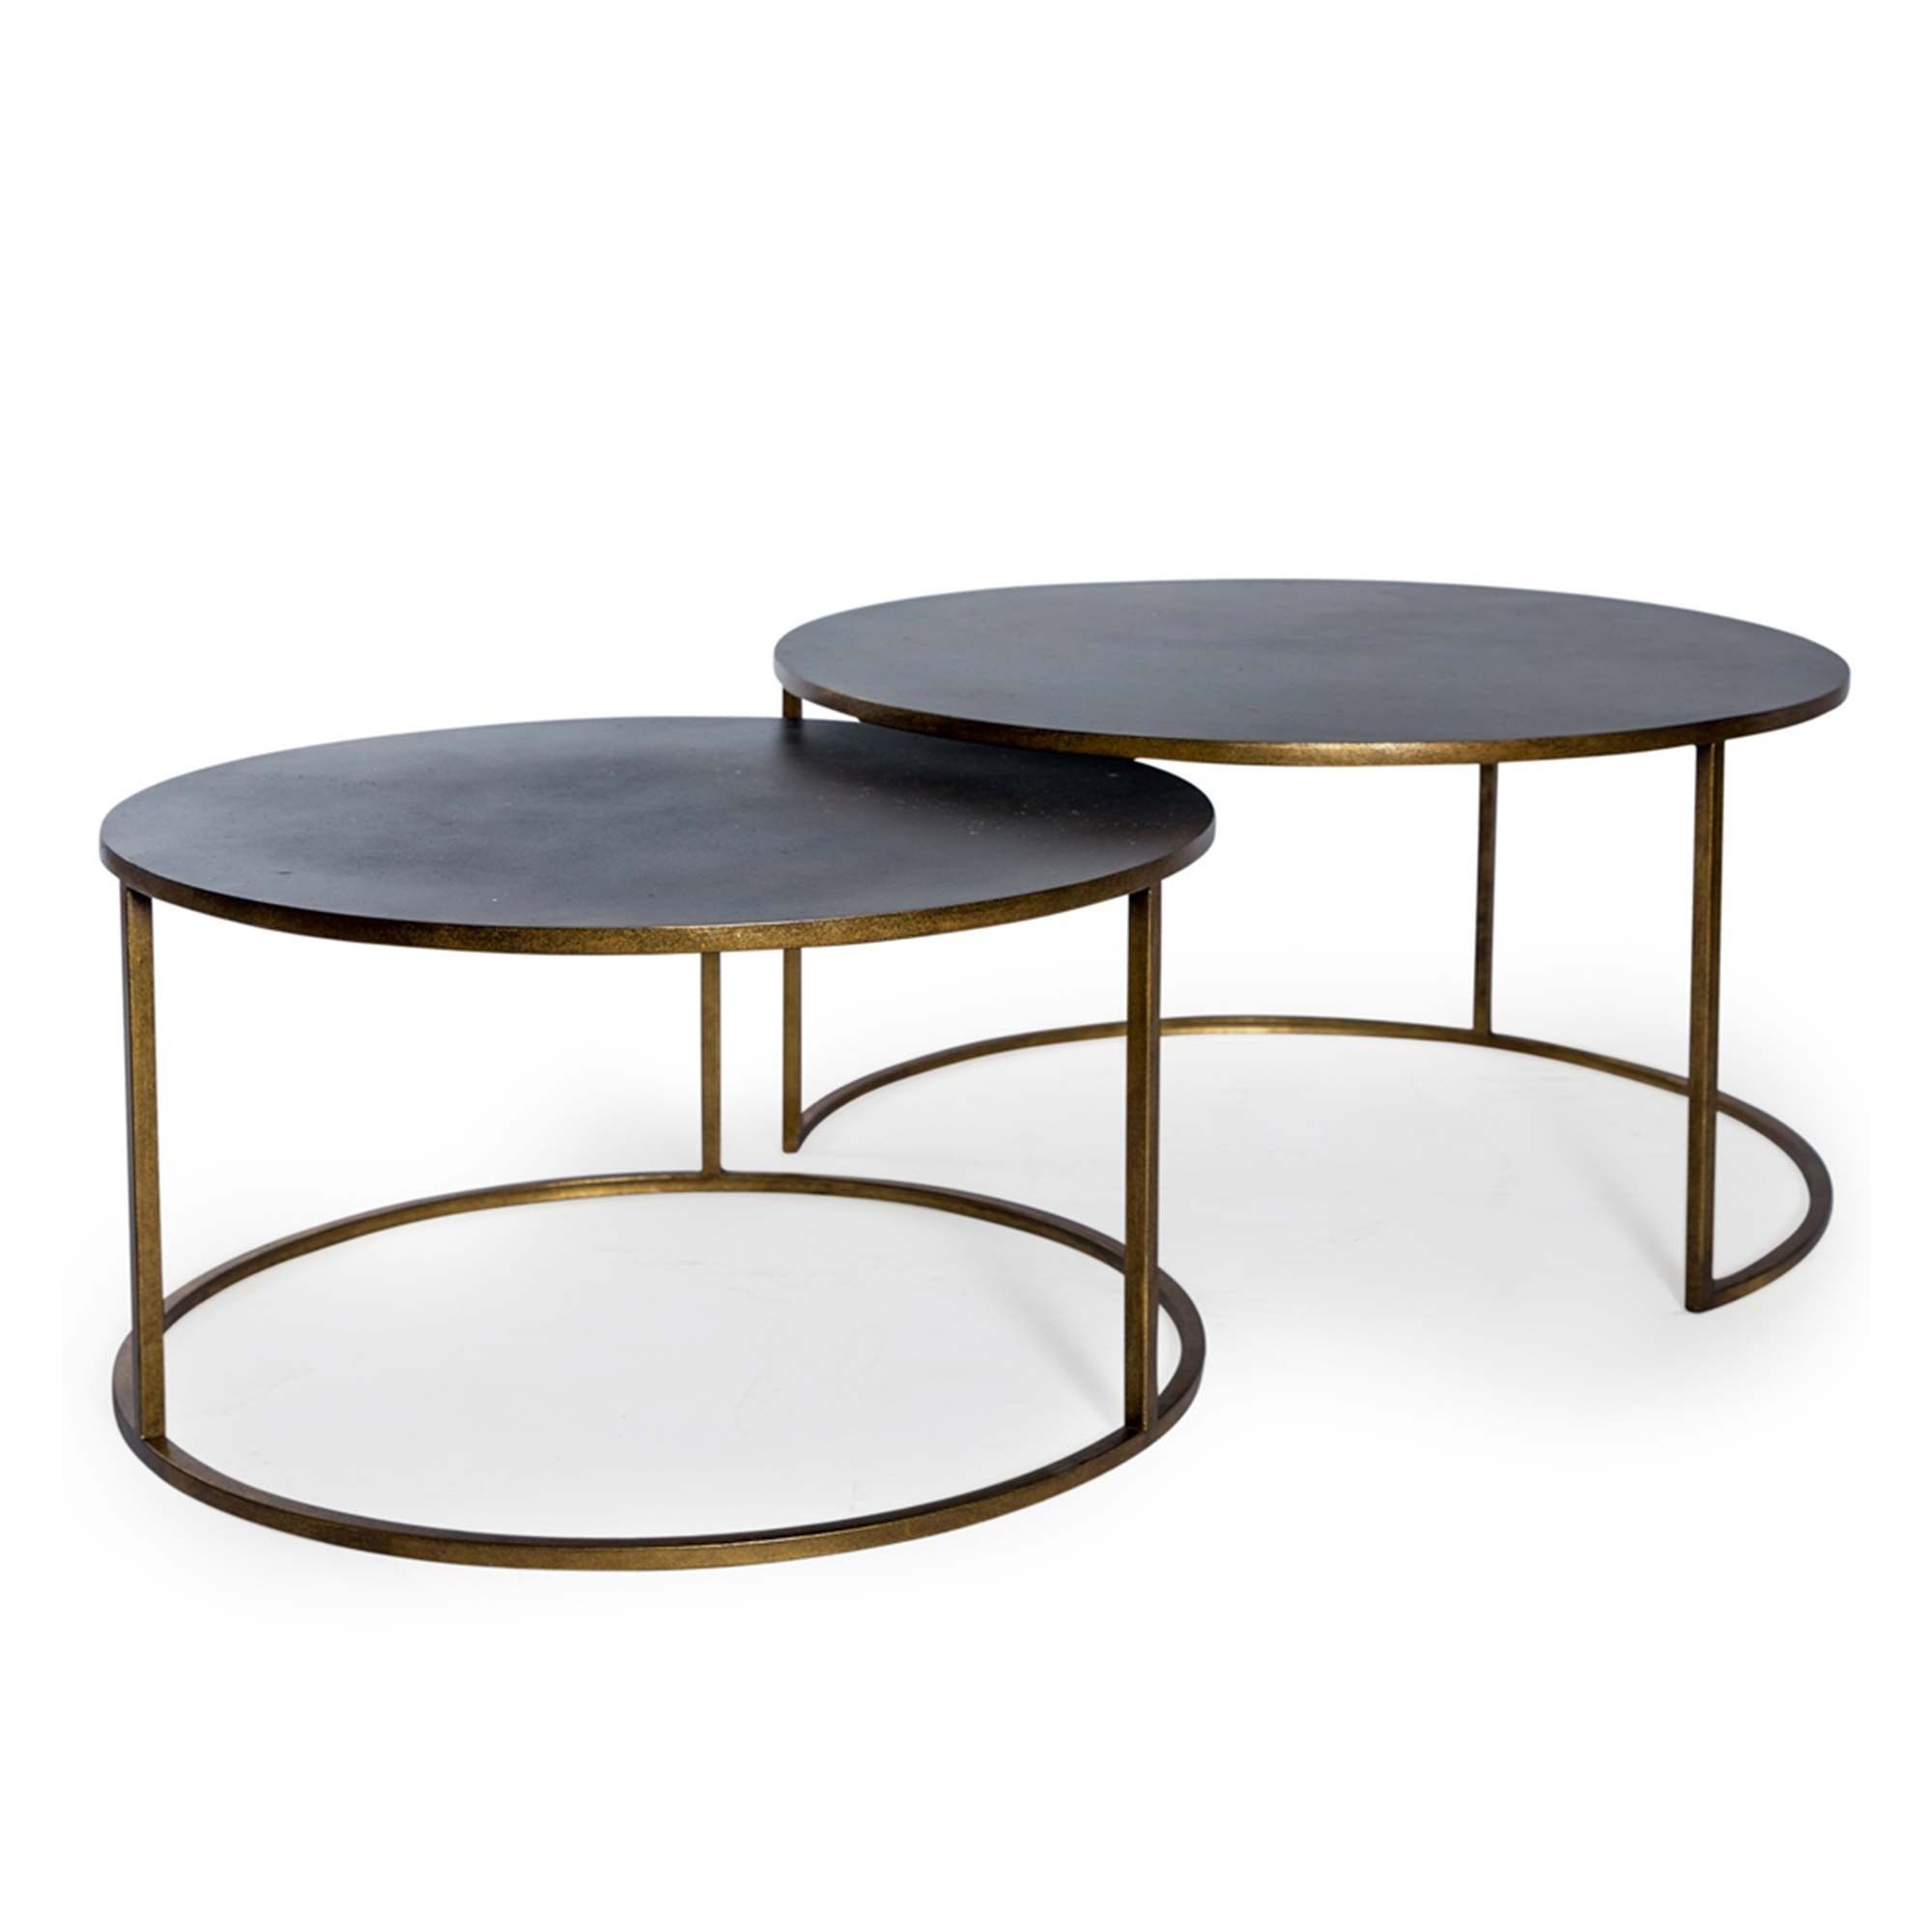 Nest Of 2 Antique Gold And Bronze Metal Coffee Tables | Nest Of Tables With Regard To Bronze Metal Coffee Tables (View 4 of 20)